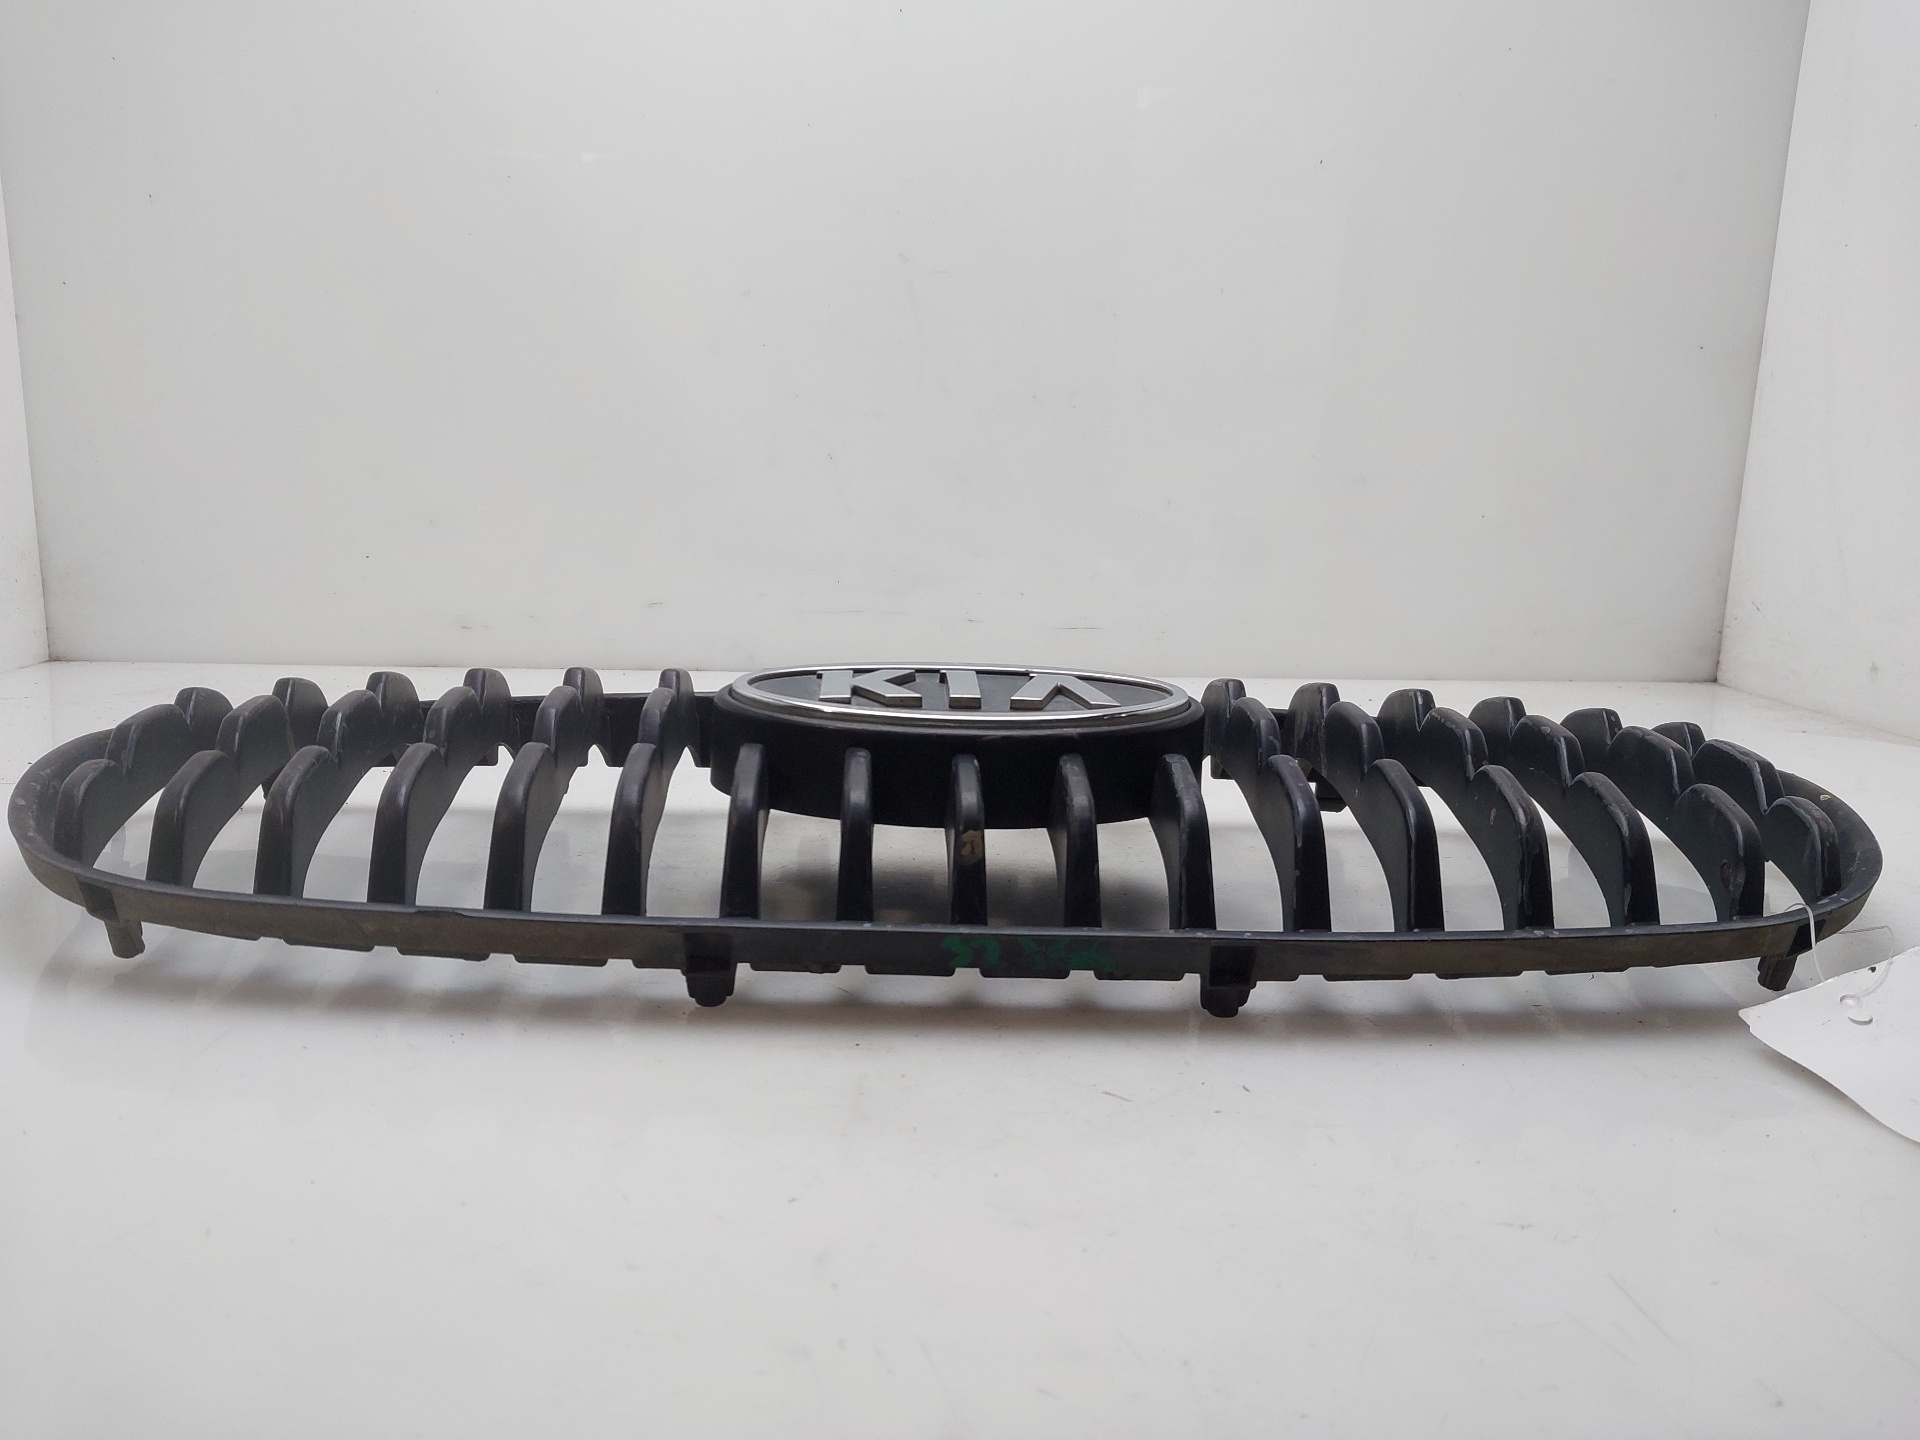 RENAULT Picanto 1 generation (2004-2011) Radiator Grille 8636007010 24773504